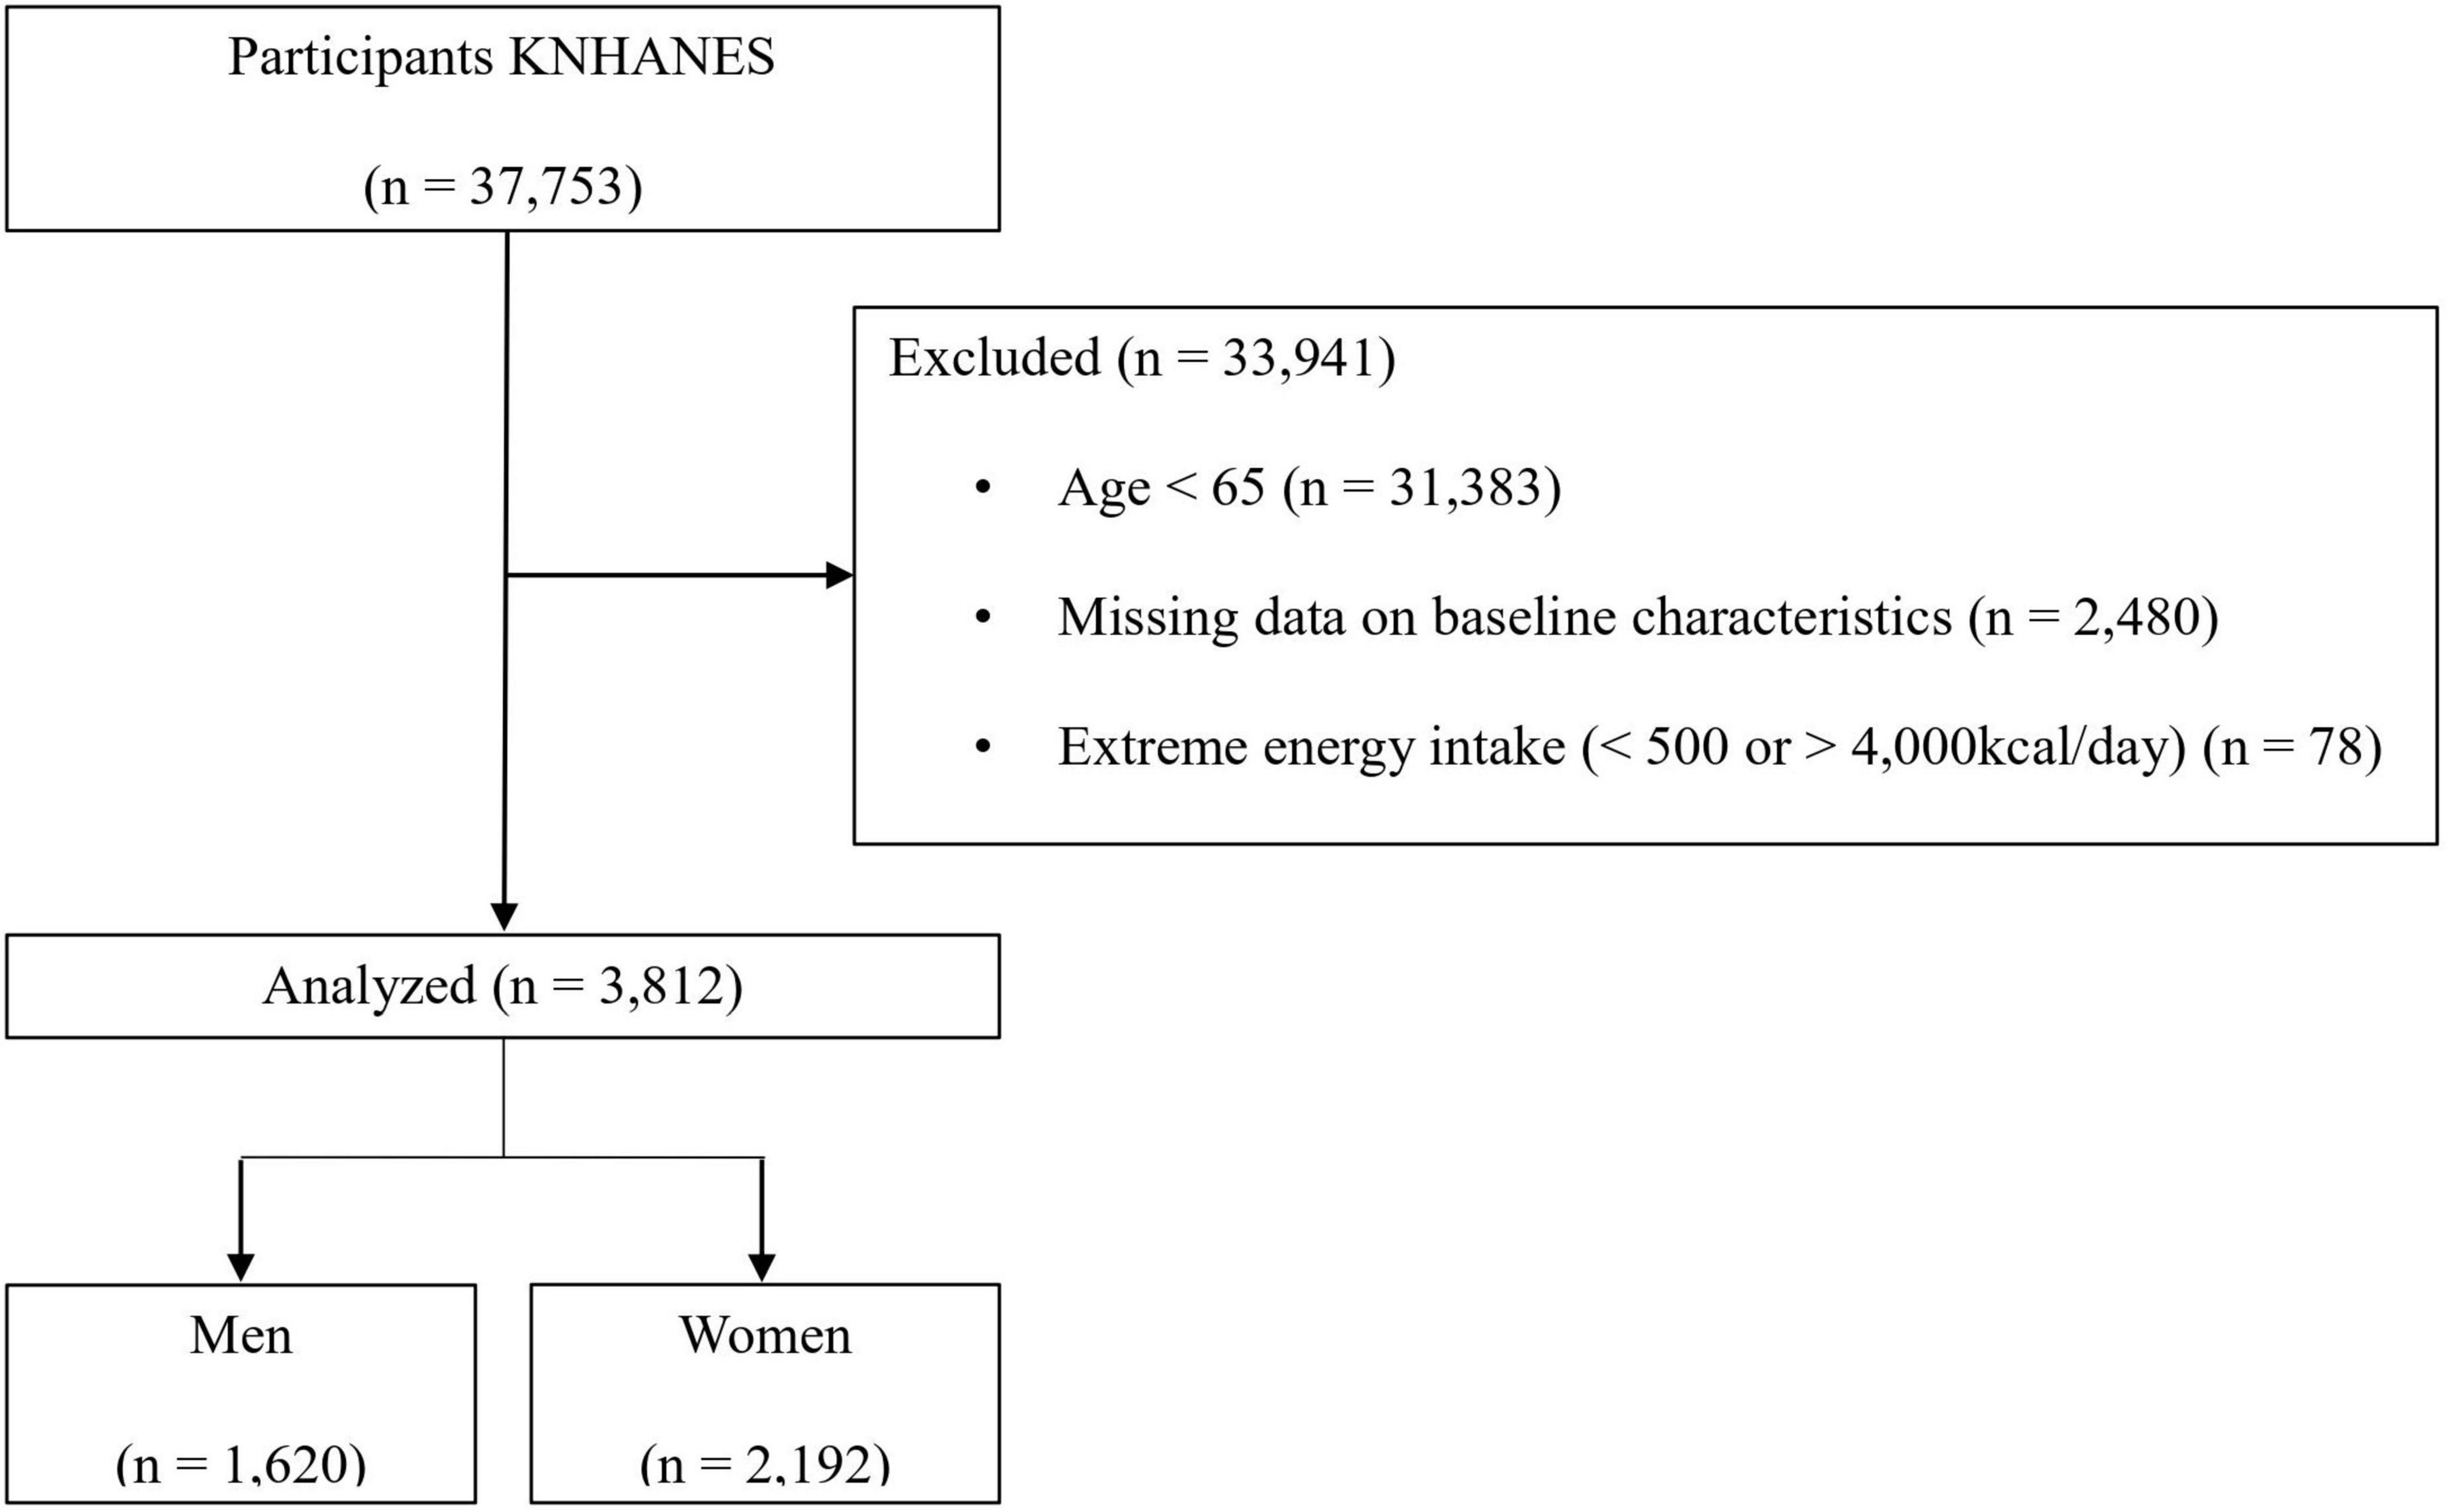 Intake of omega-3 polyunsaturated fatty acids and fish associated with prevalence of low lean mass and muscle mass among older women: Analysis of Korea National Health and Nutrition Examination Survey, 2008-2011